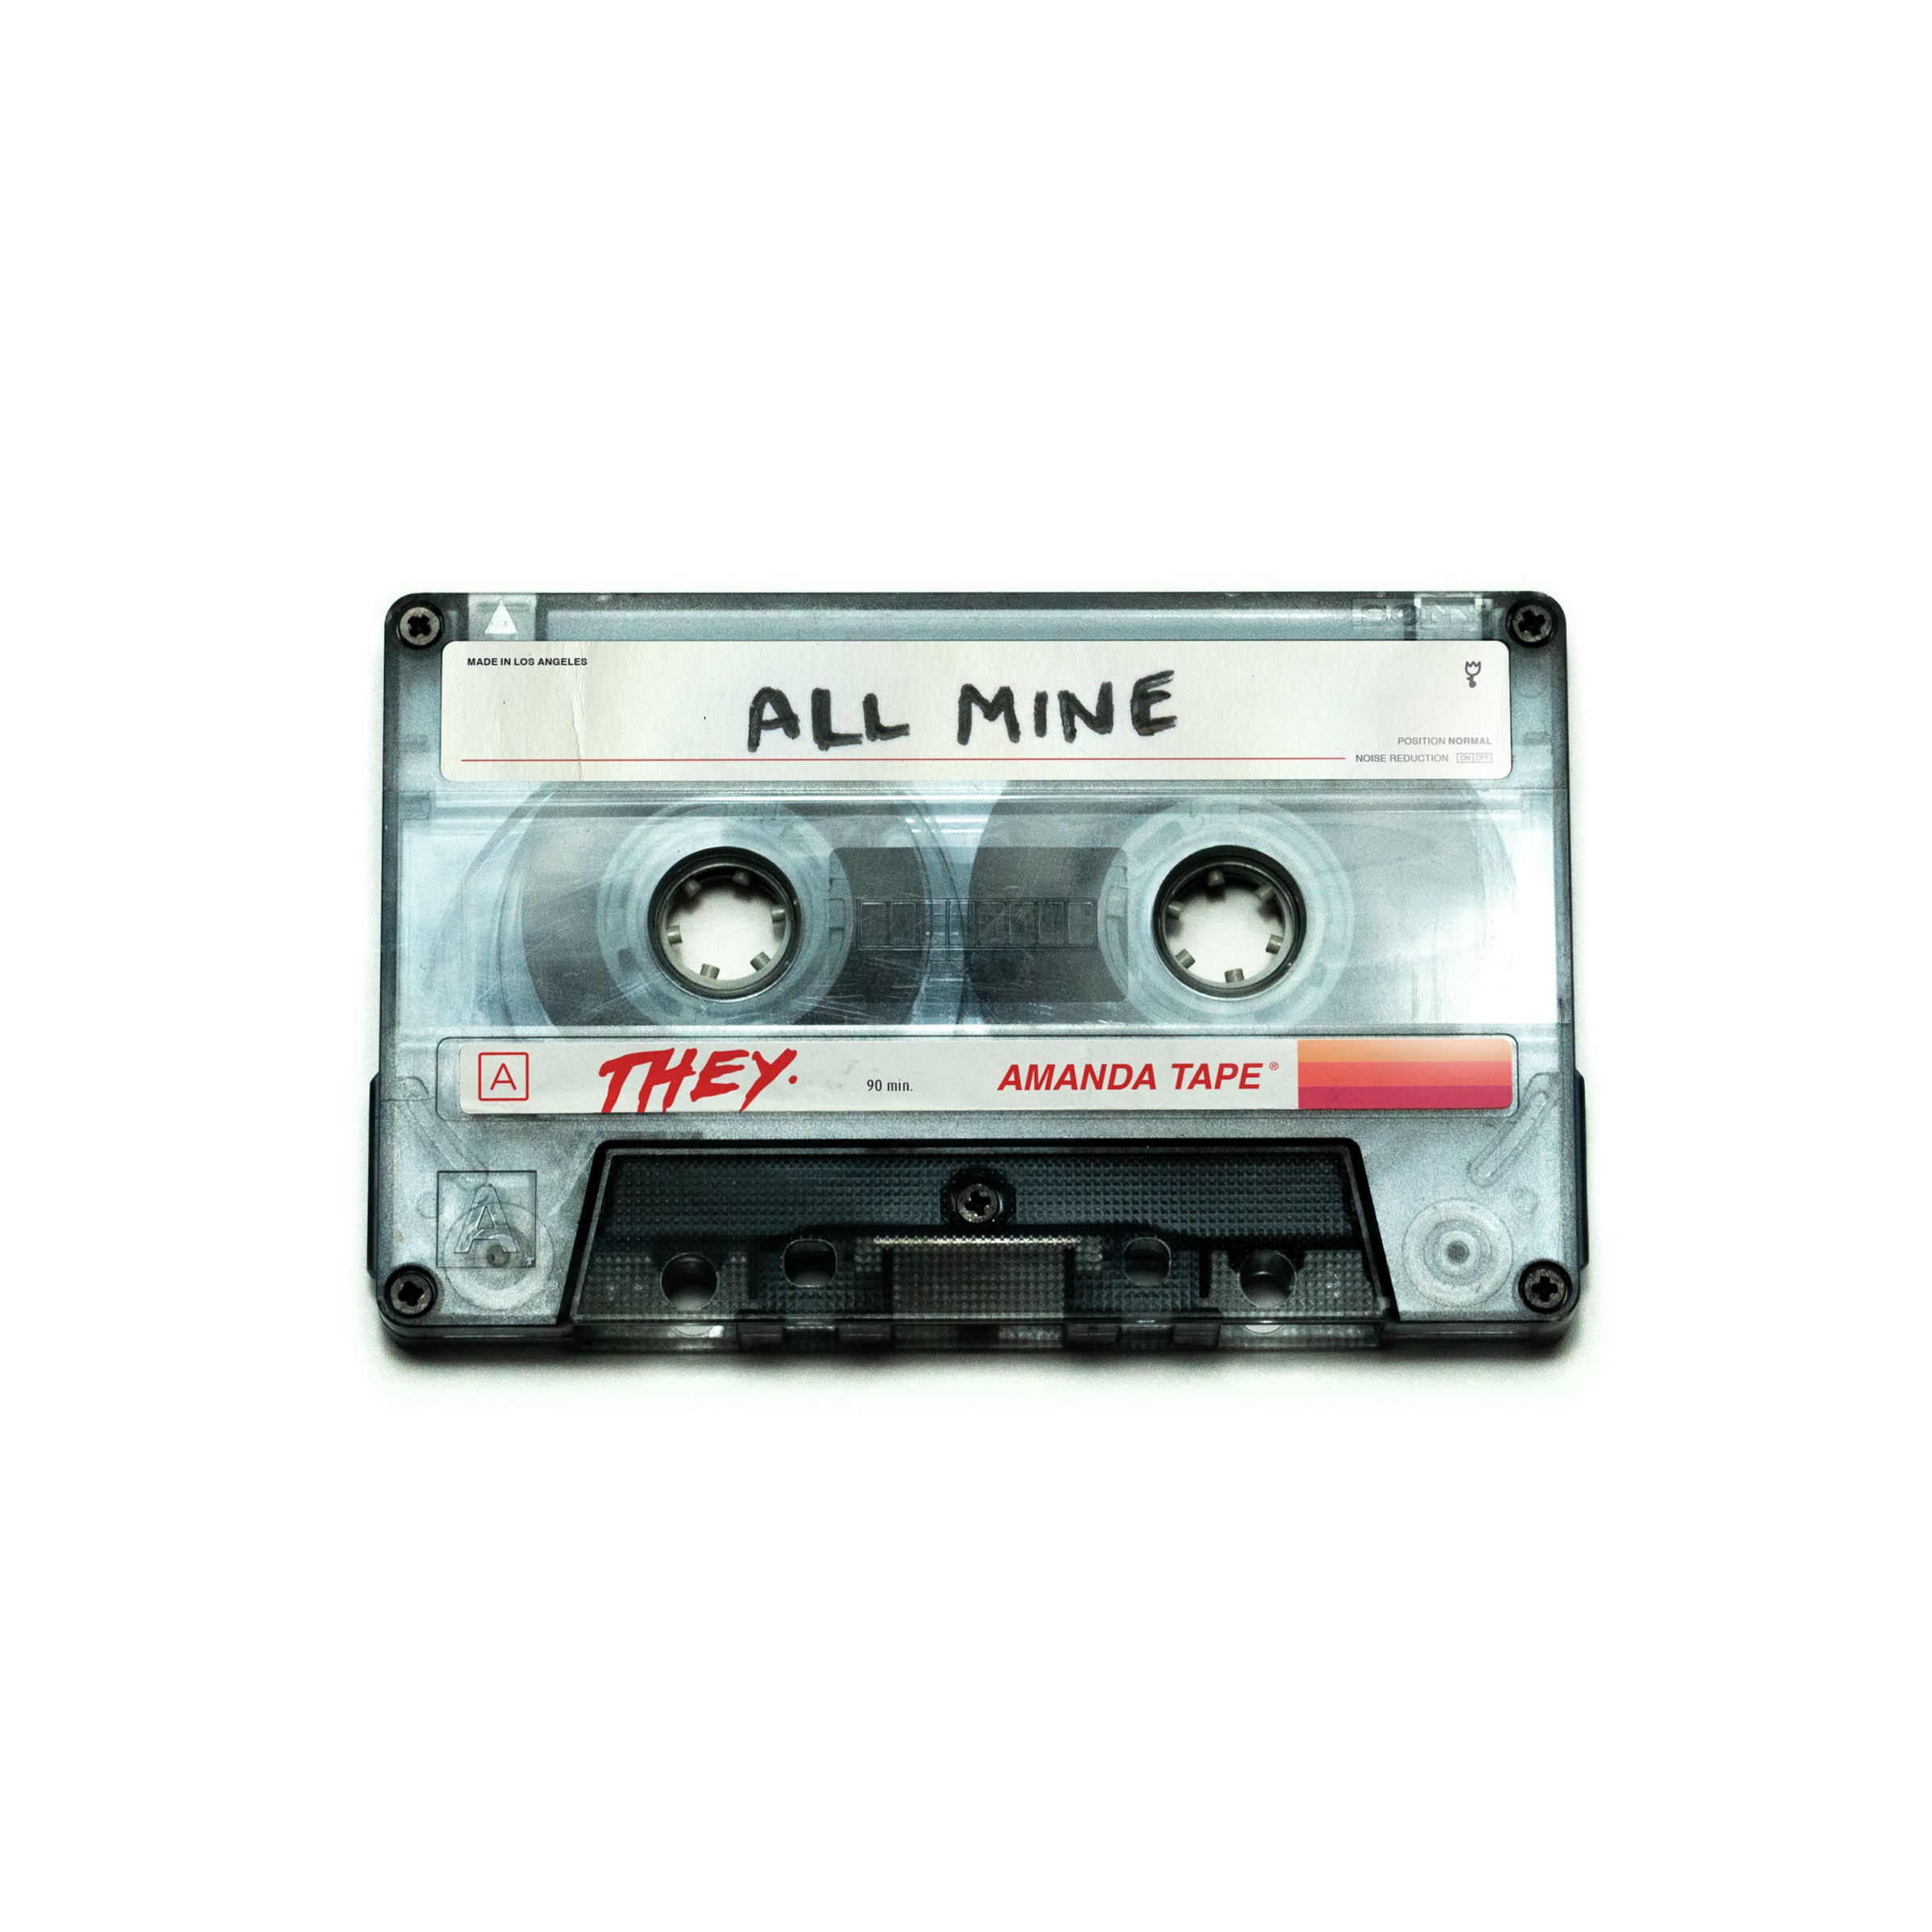 THEY. — All Mine cover artwork